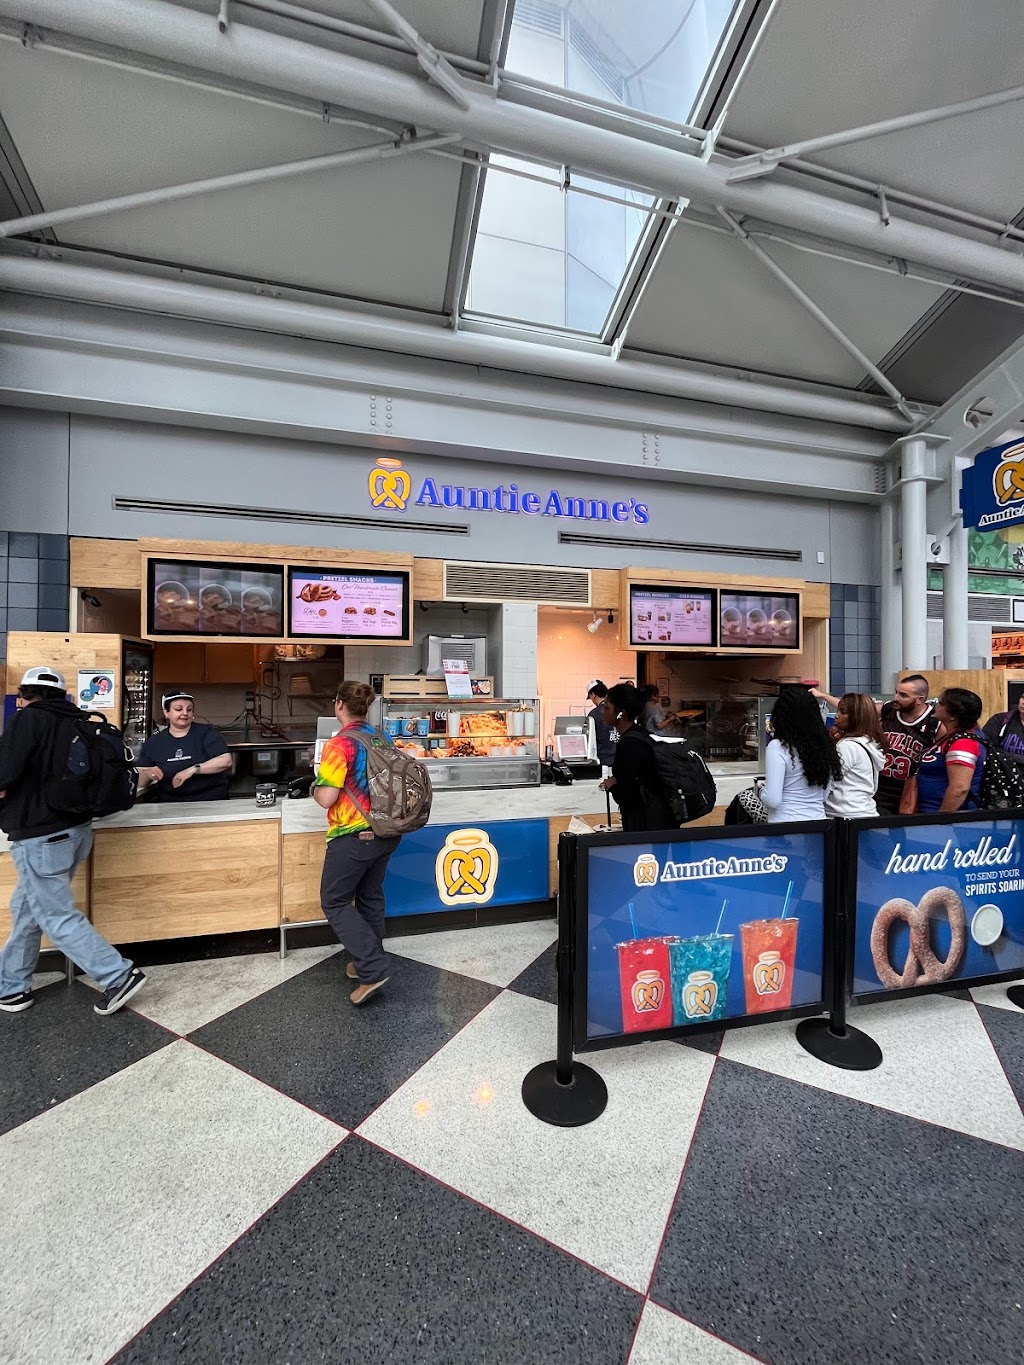 Auntie Annes | OHare International Airport Terminal 1, Concourse C, Gate C18, Chicago, IL 60666 | Phone: (877) 778-9588